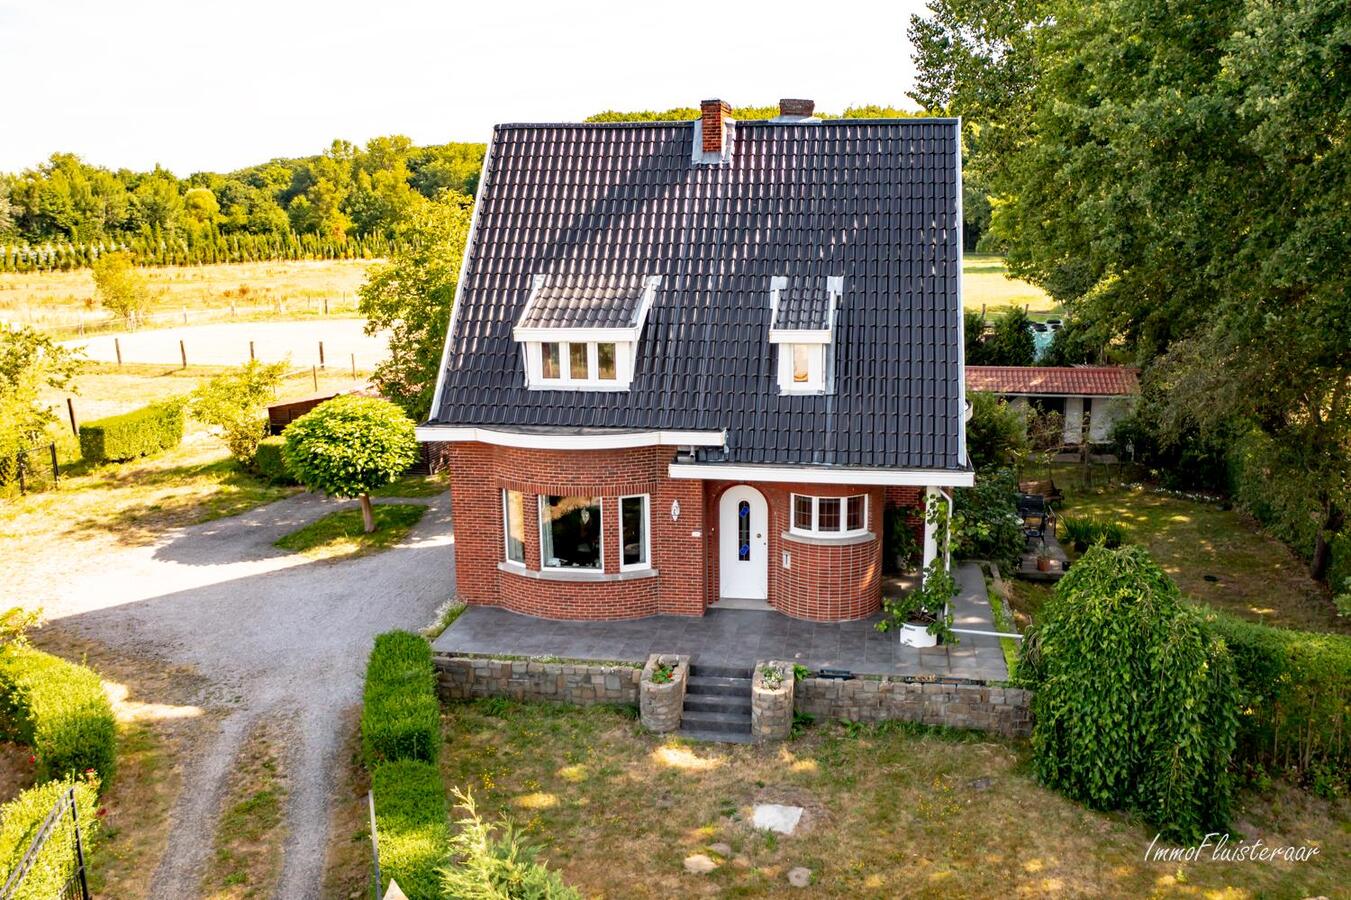 Property for sale |  with option - with restrictions in Aarschot